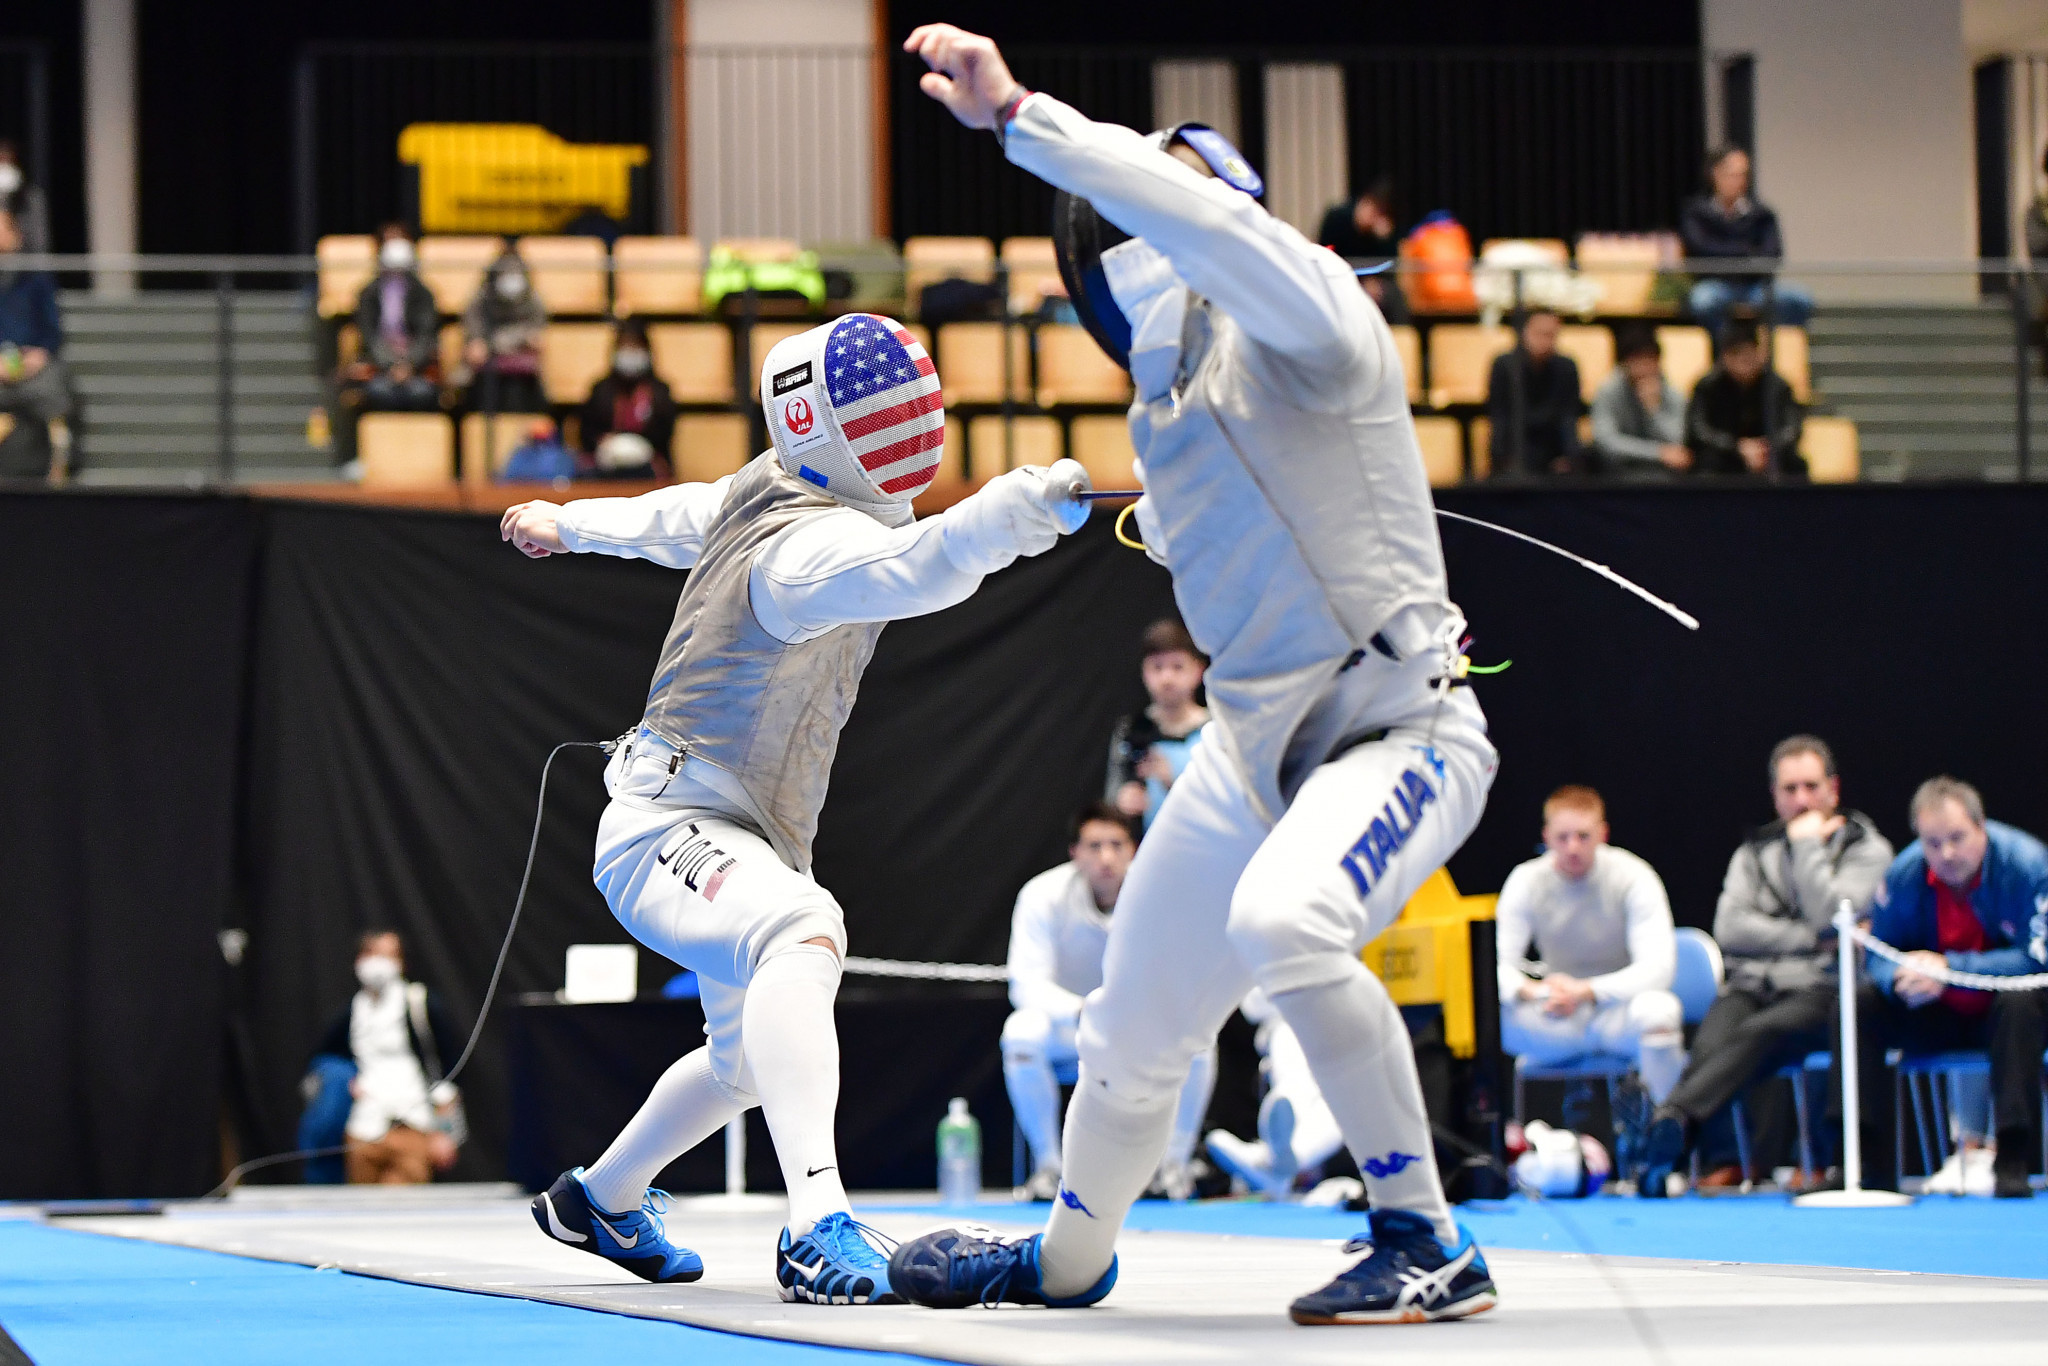 Two American fencers have progressed into the main round of the FIE Foil Grand Prix in Anaheim ©Getty Images